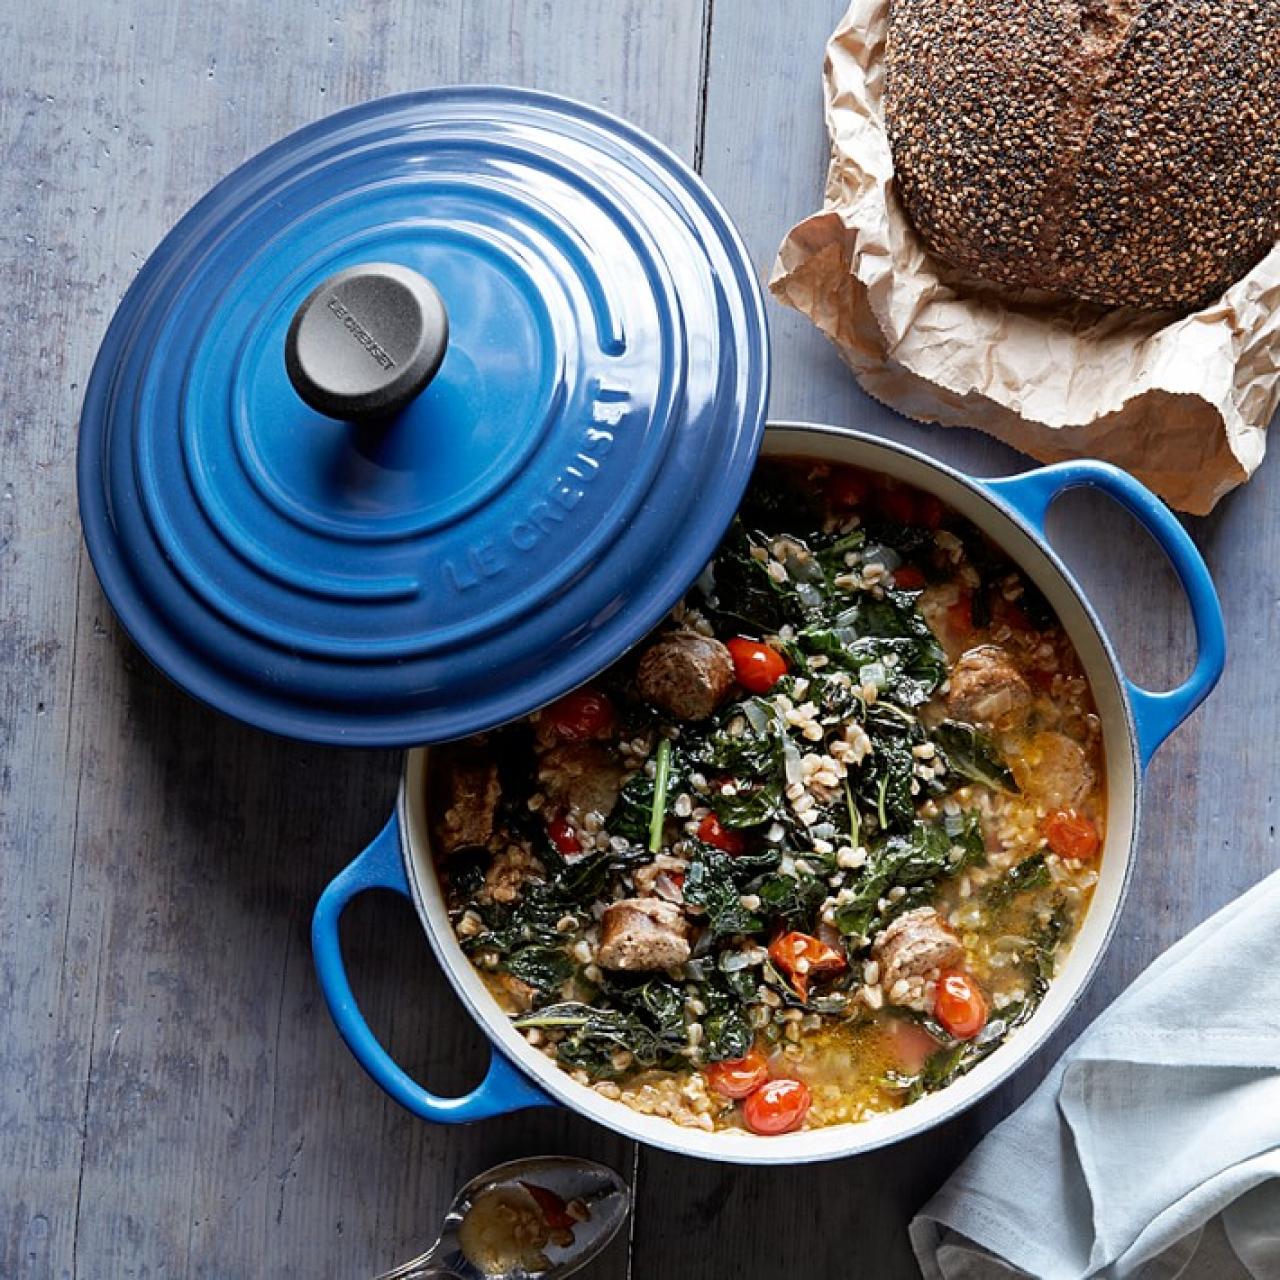 Le Creuset Review 2021: We Tested Its Classic Dutch Oven and 6 Other Pieces